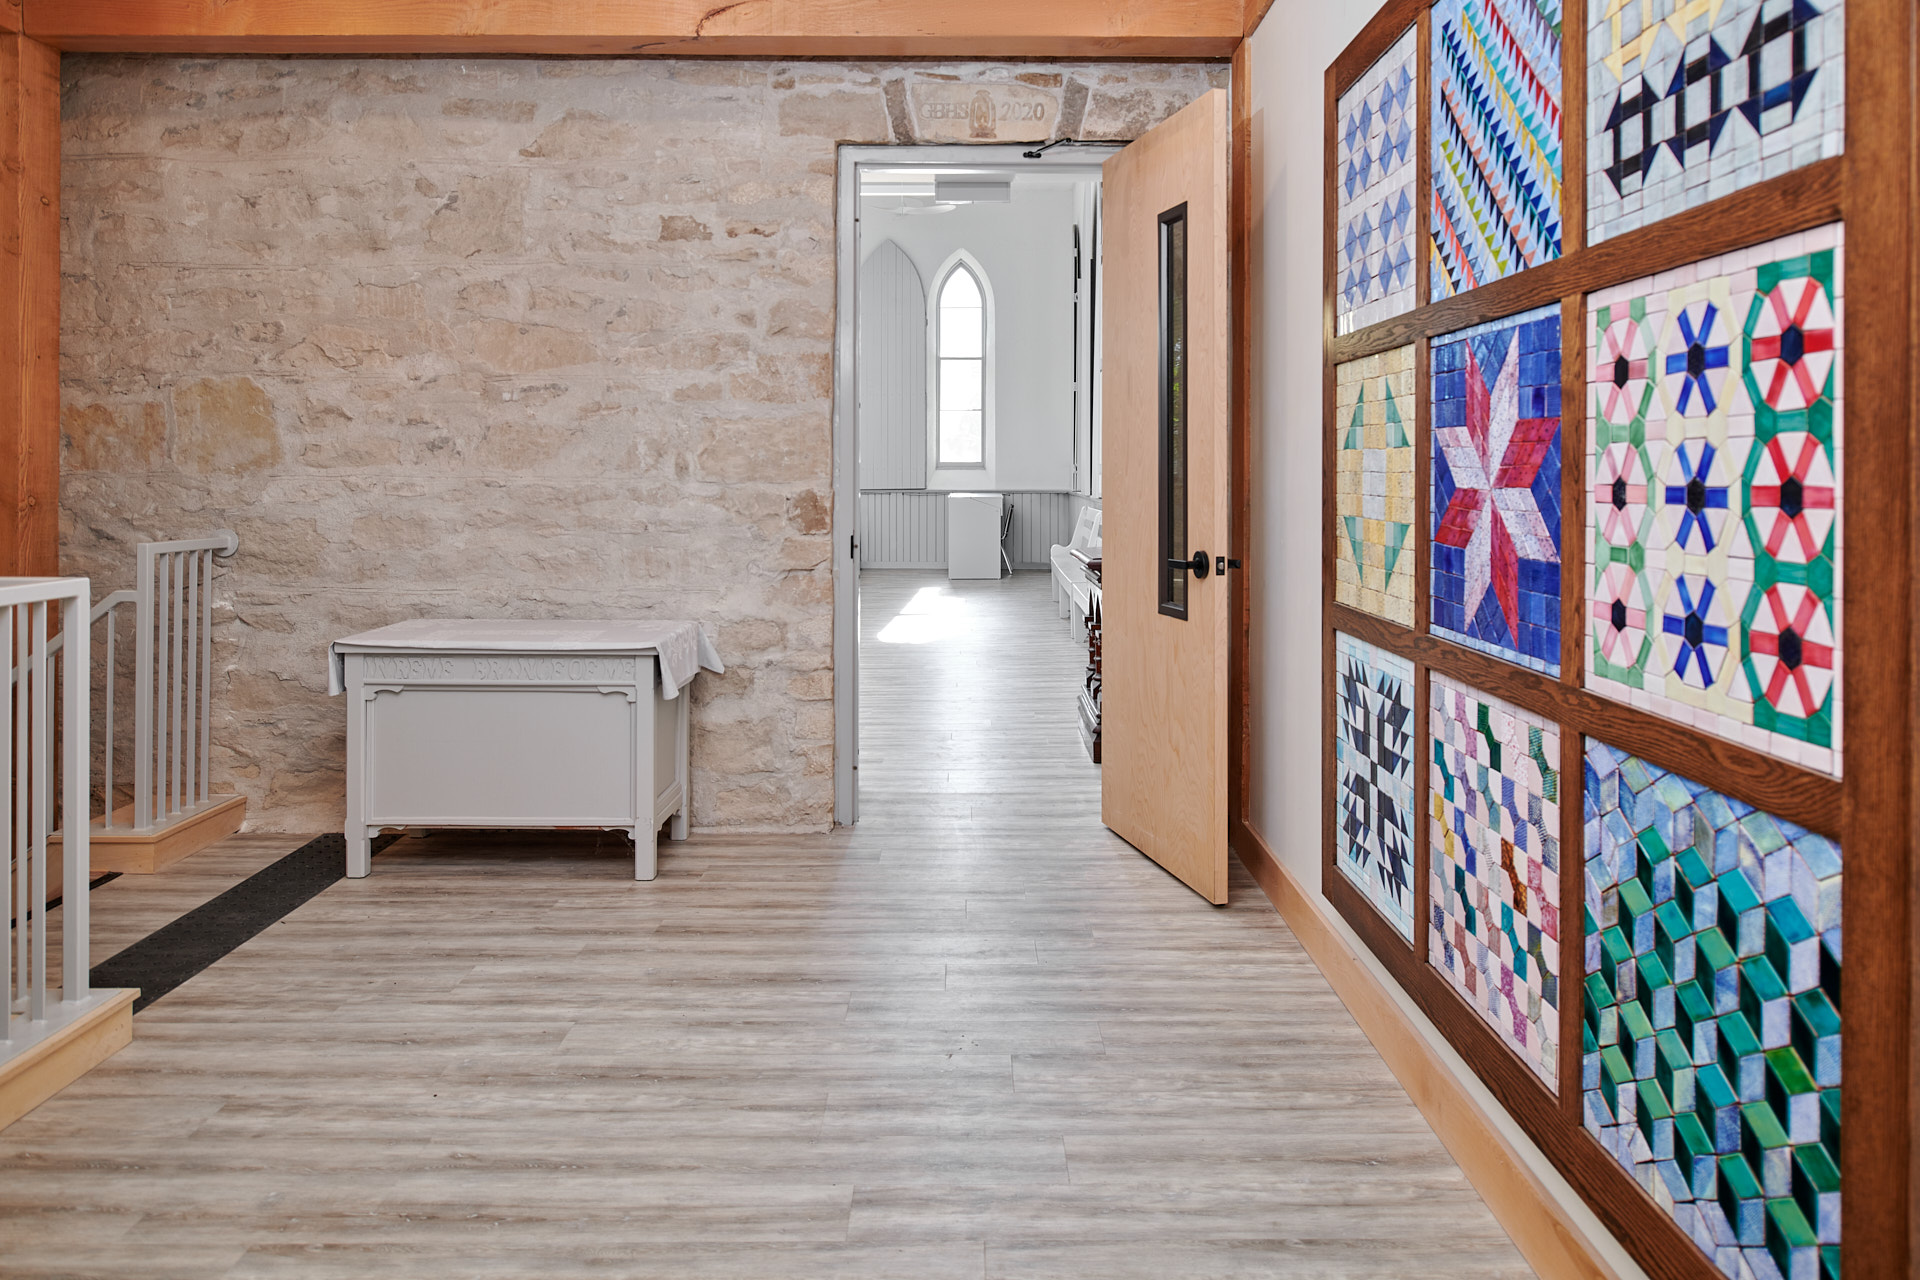 A one-point perspective in a brightly lit interior space with light wood flooring. Another brightly lit space is visible through an open wooden door in a stone wall and, on the right, a large grid of nine quilts is framed on the wall.